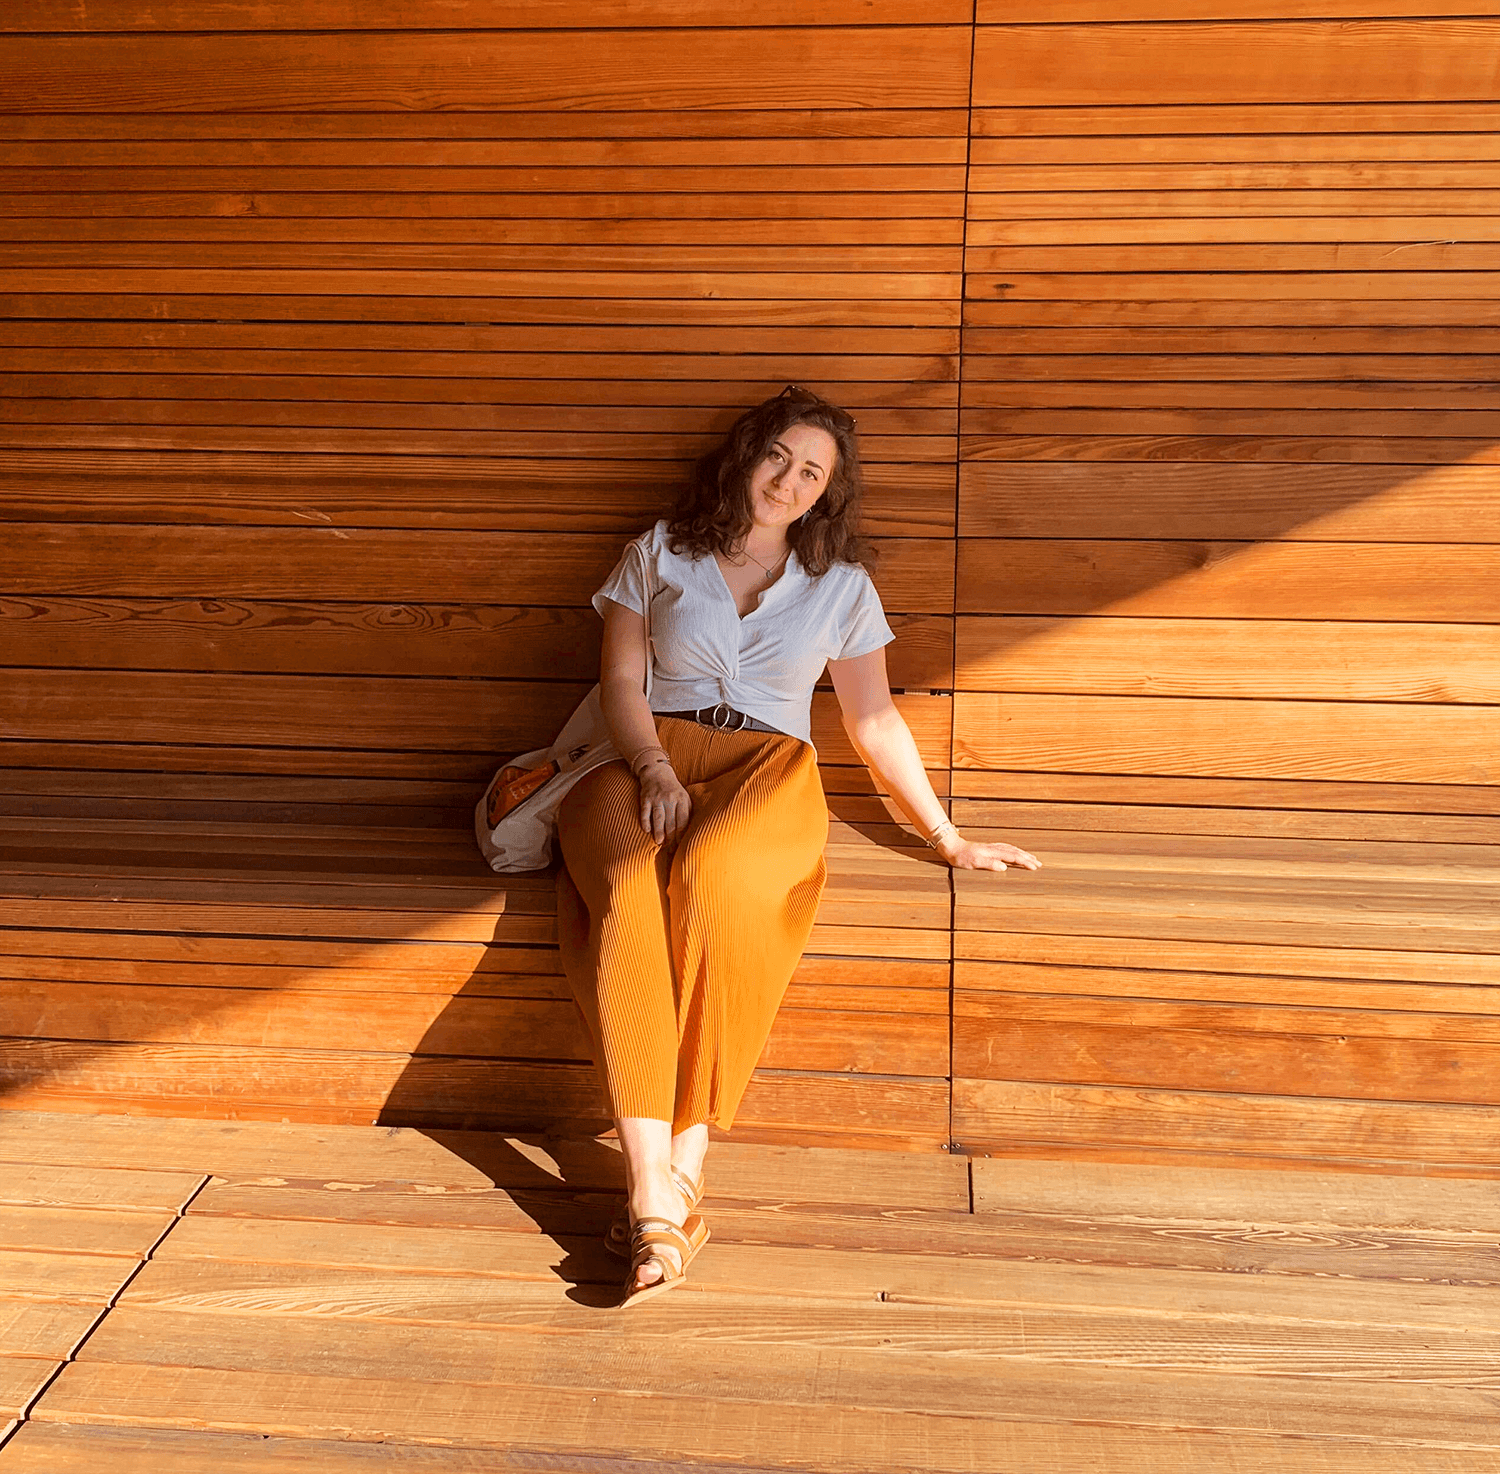 this is a photo of me, michelle! i'm sitting on a wooden bench at the Vita design museum - the hue of the photo is orange, and there's symmetrical shadow on half of it.